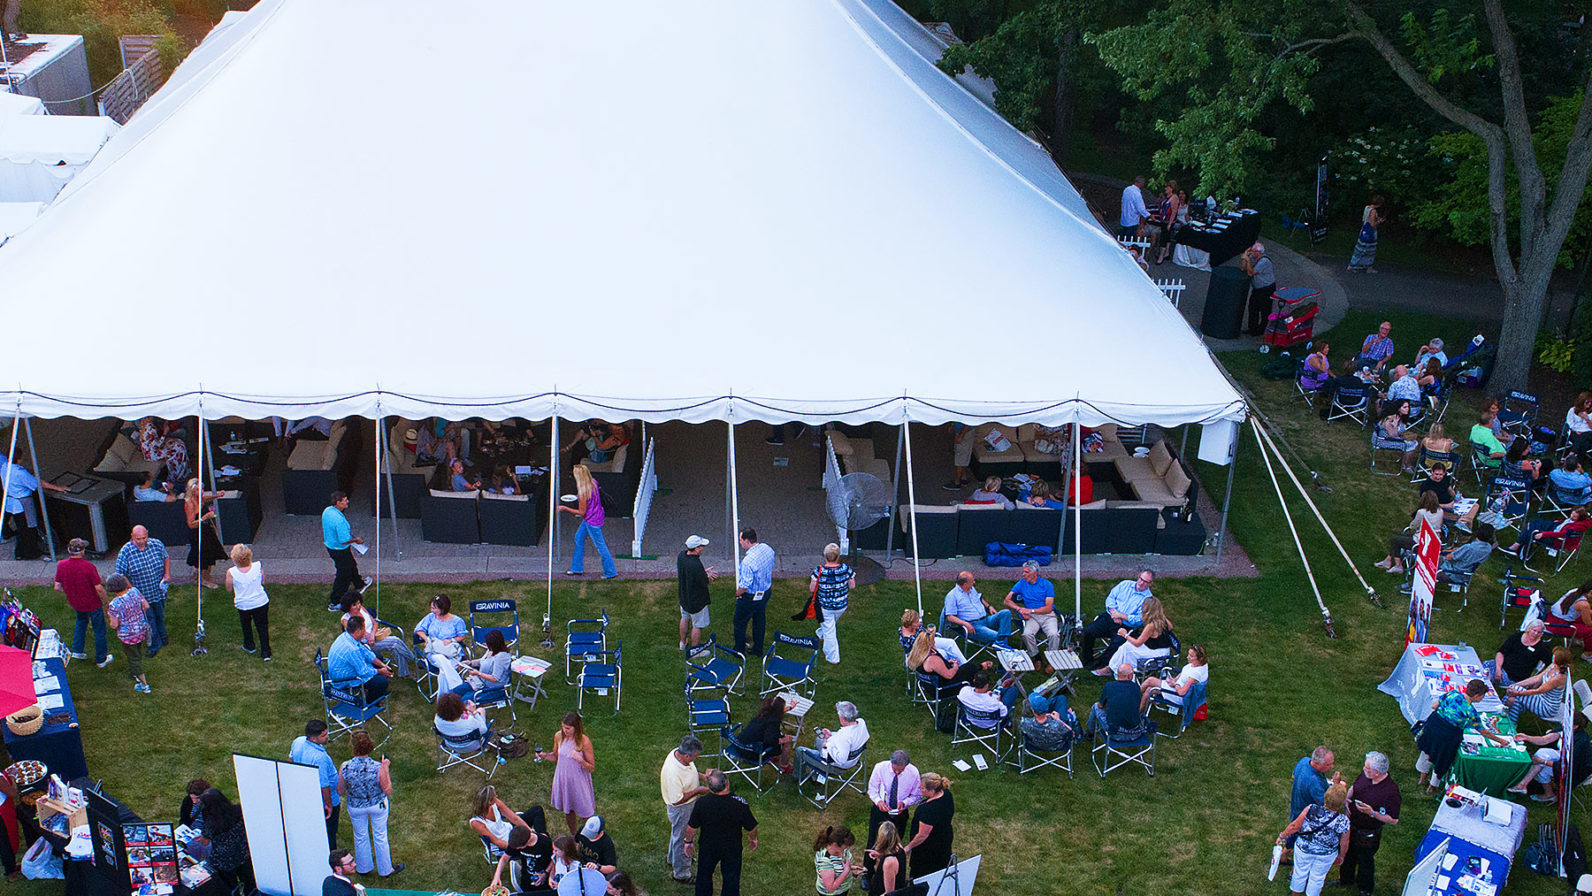 featured image for the ravinia festival image gallery